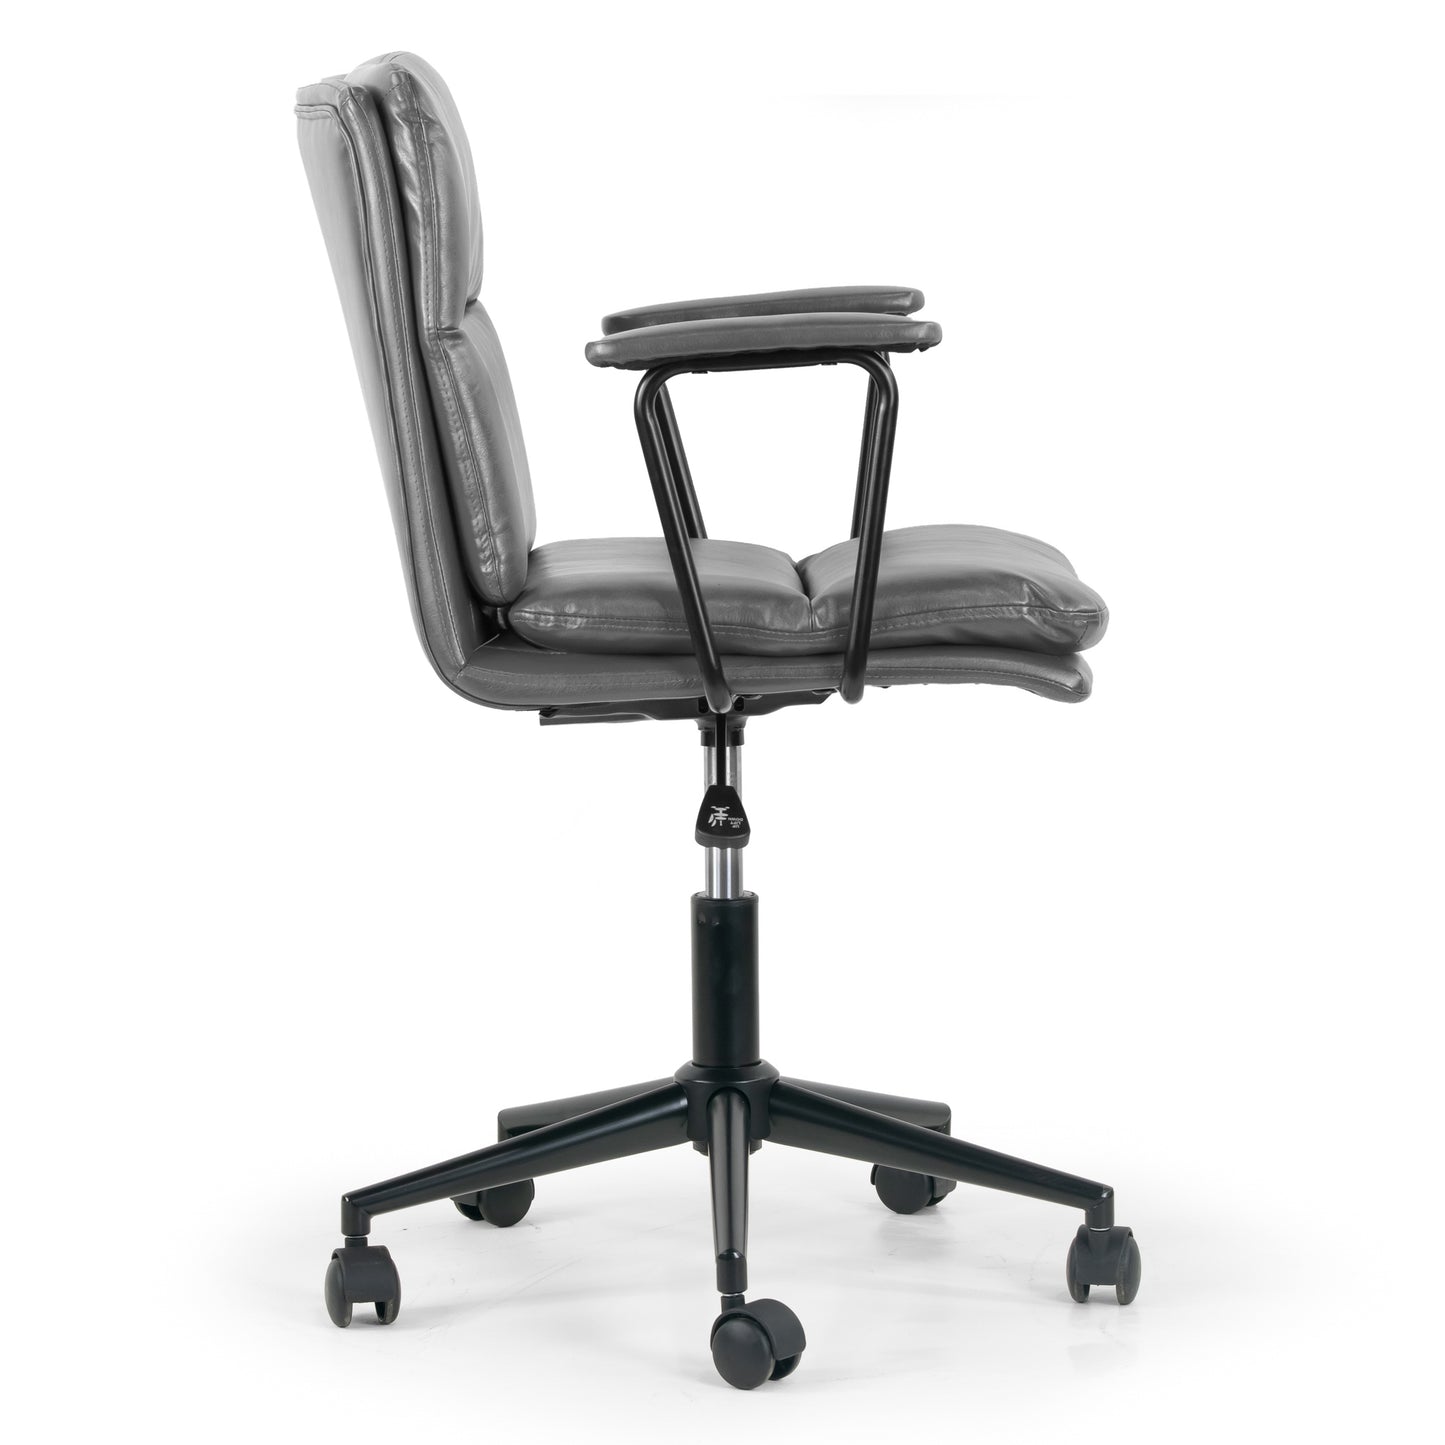 Avalee Grey Faux Leather Adjustable Height Swivel Office Chair with Arms